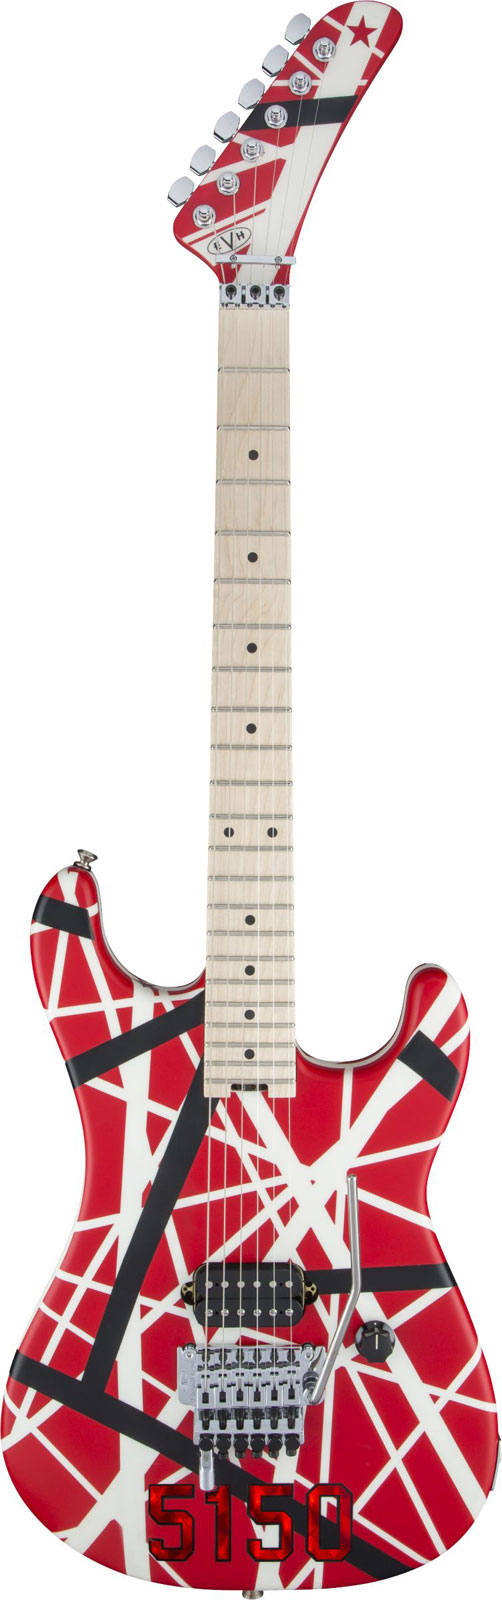 EVH STRIPED 5150 MN, RED WITH BLACK AND WHITE STRIPES